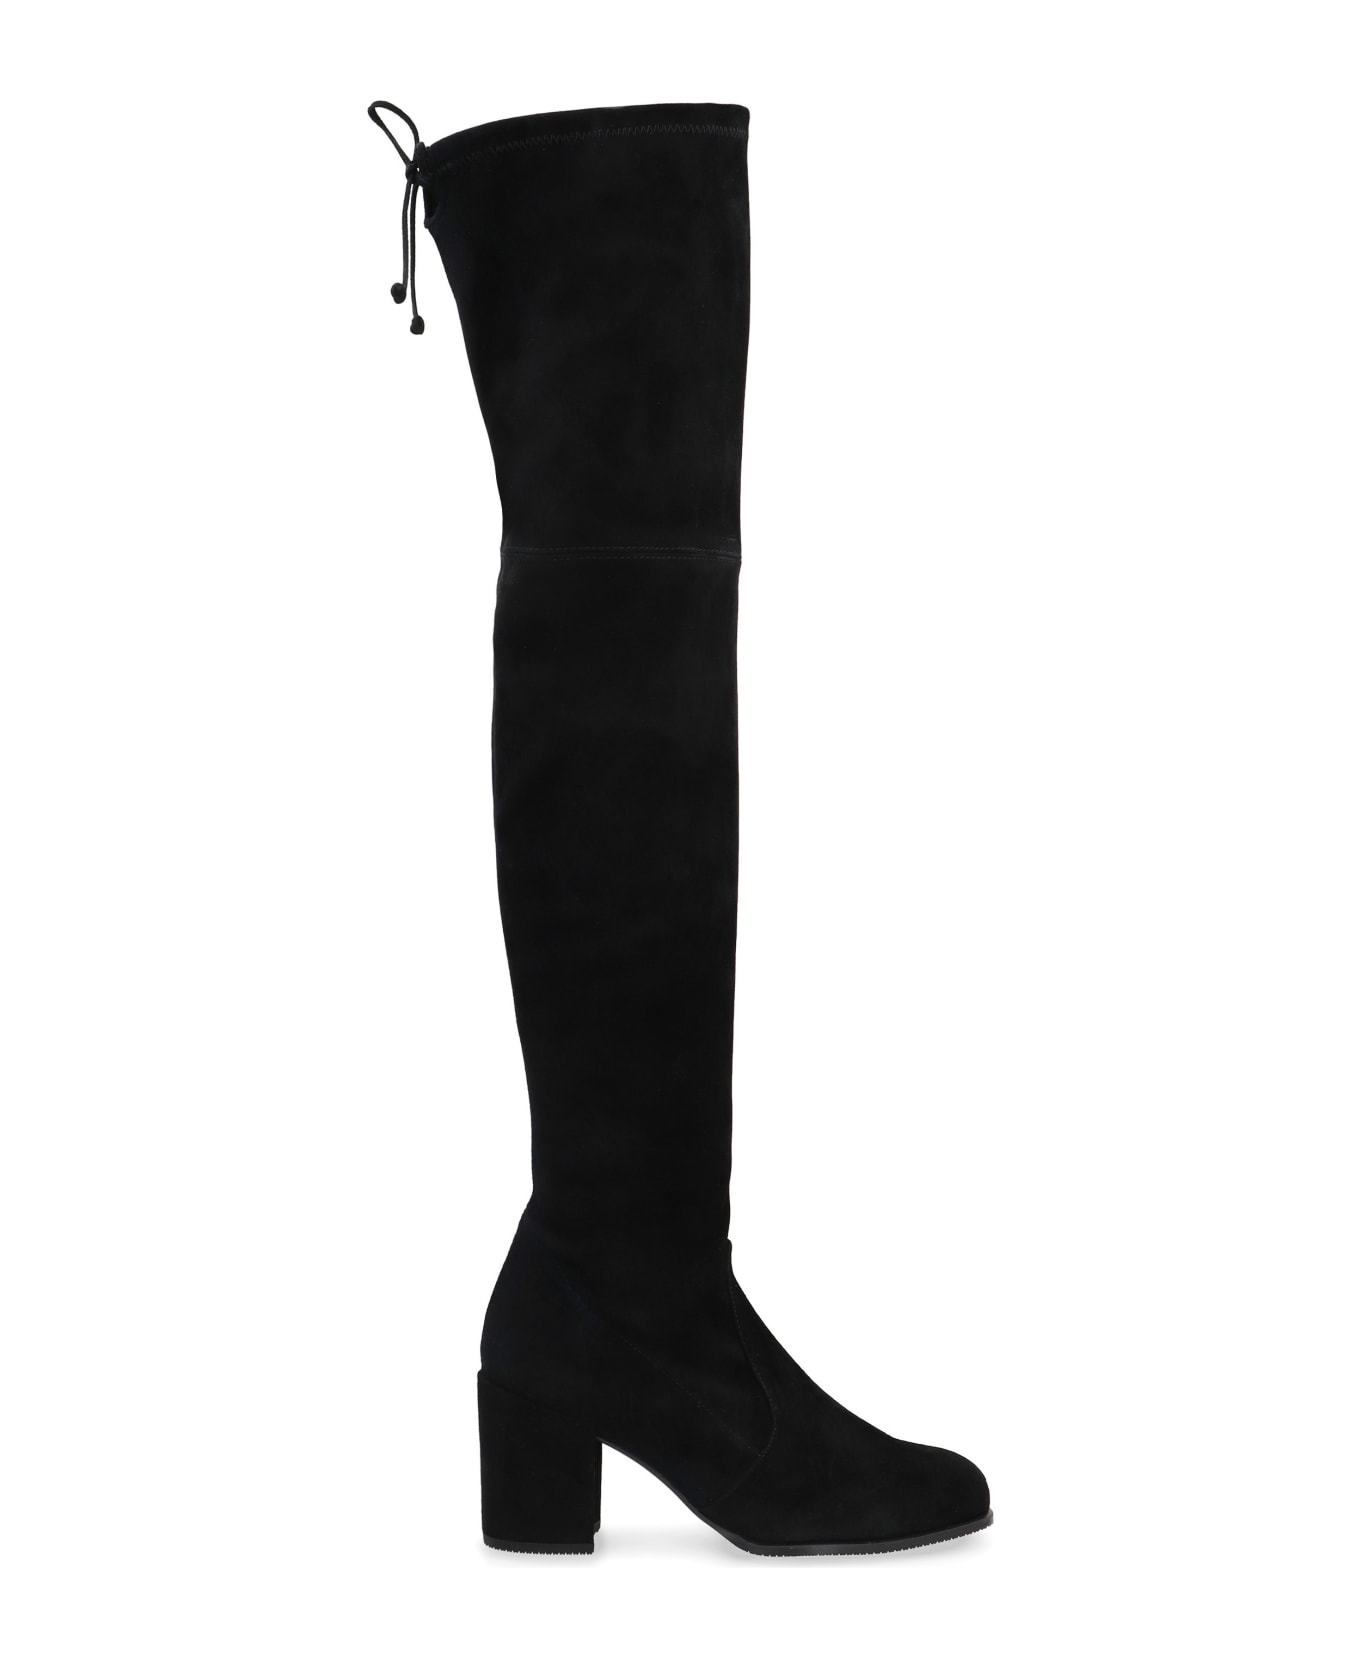 Stuart Weitzman Tieland Stretch Suede Over The Knee Boots - black ブーツ